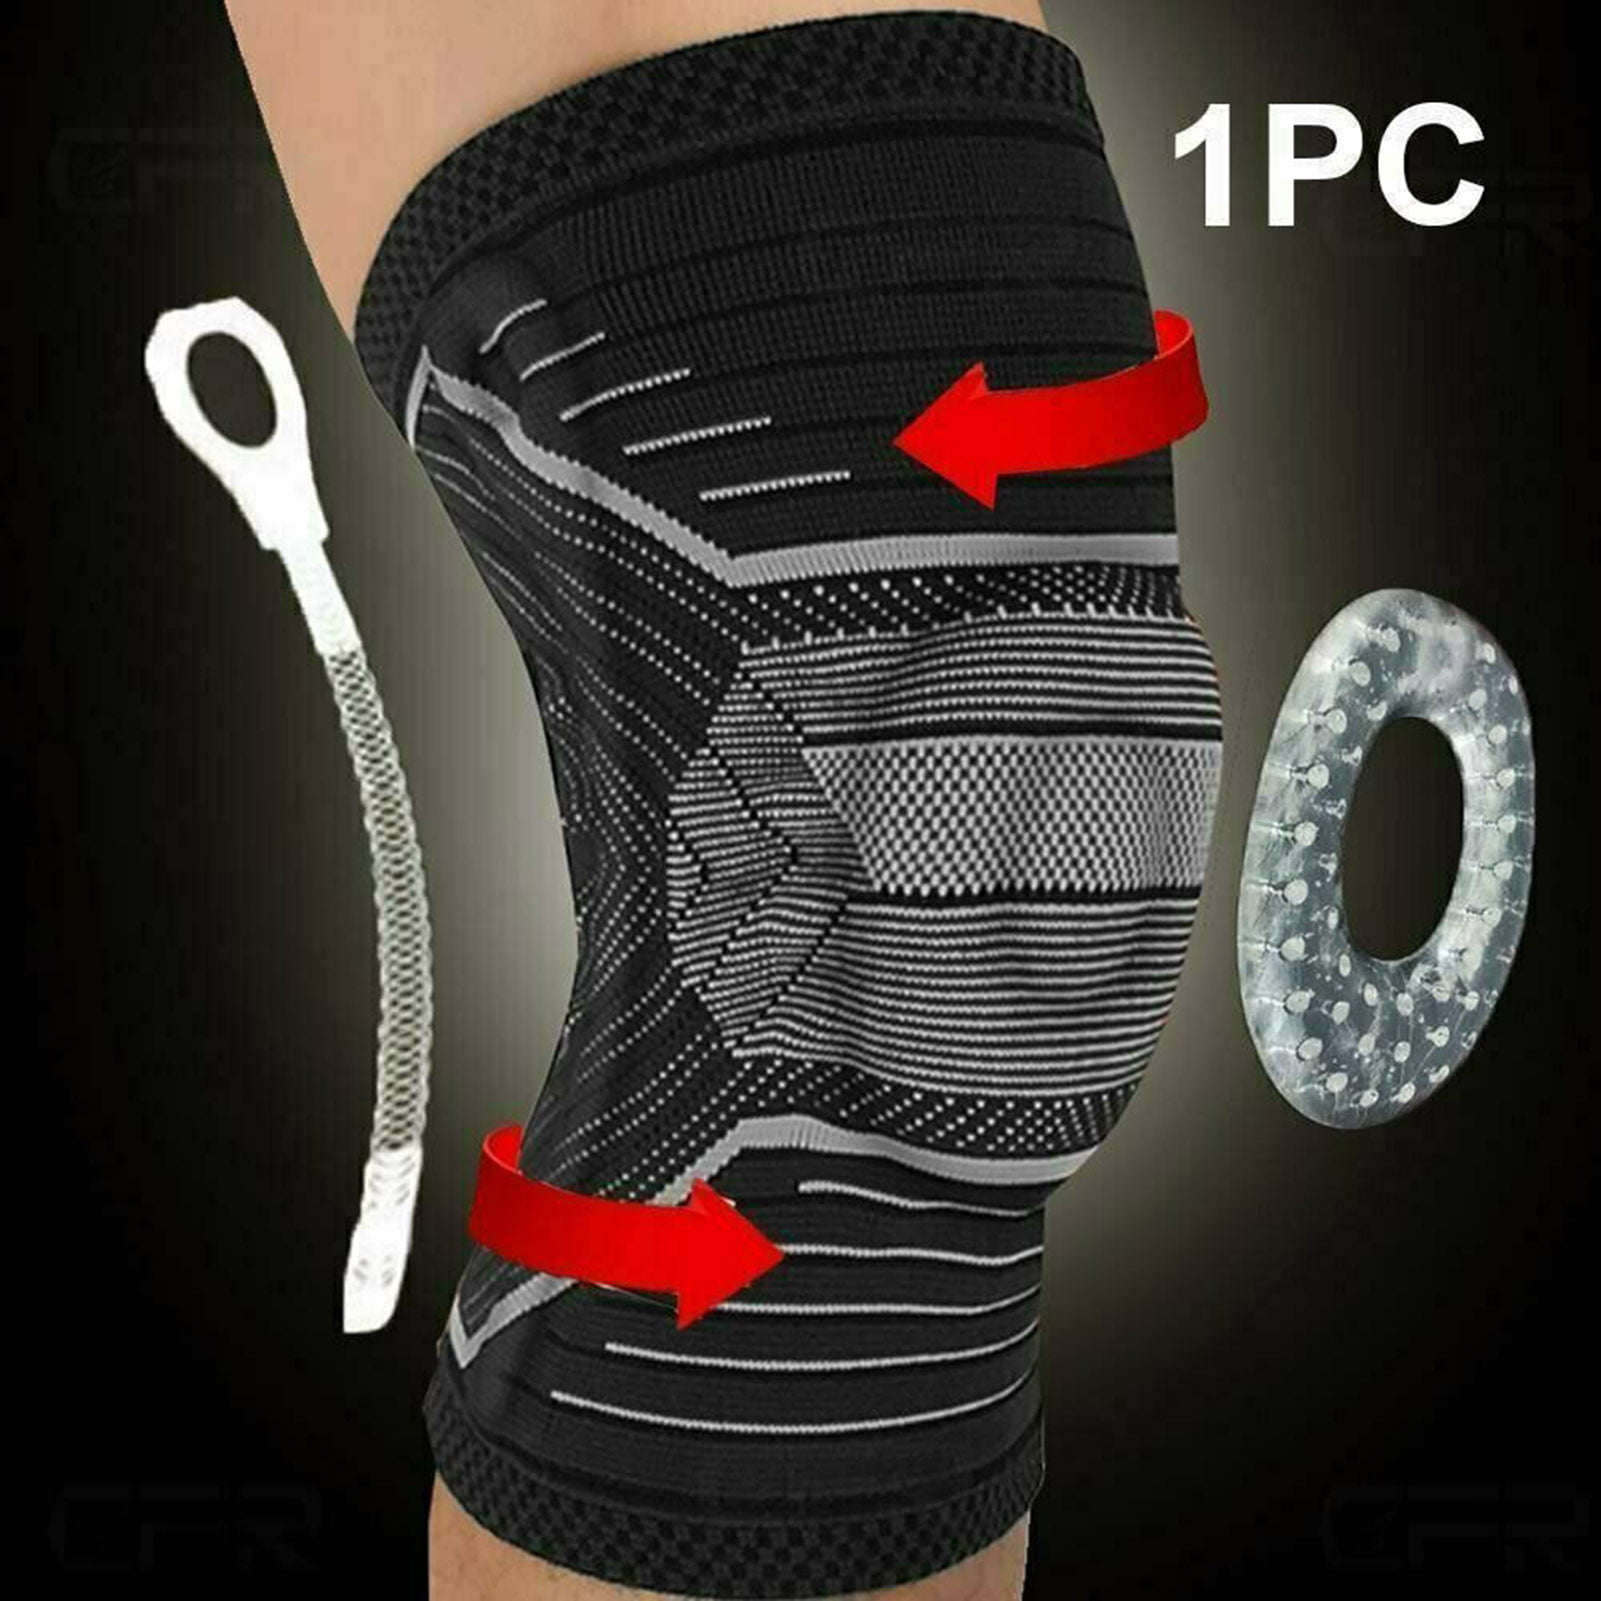 Details about   2Pcs Durabble Comfortable Knee Wraps Elastic Knee Protector for Running Hiking 